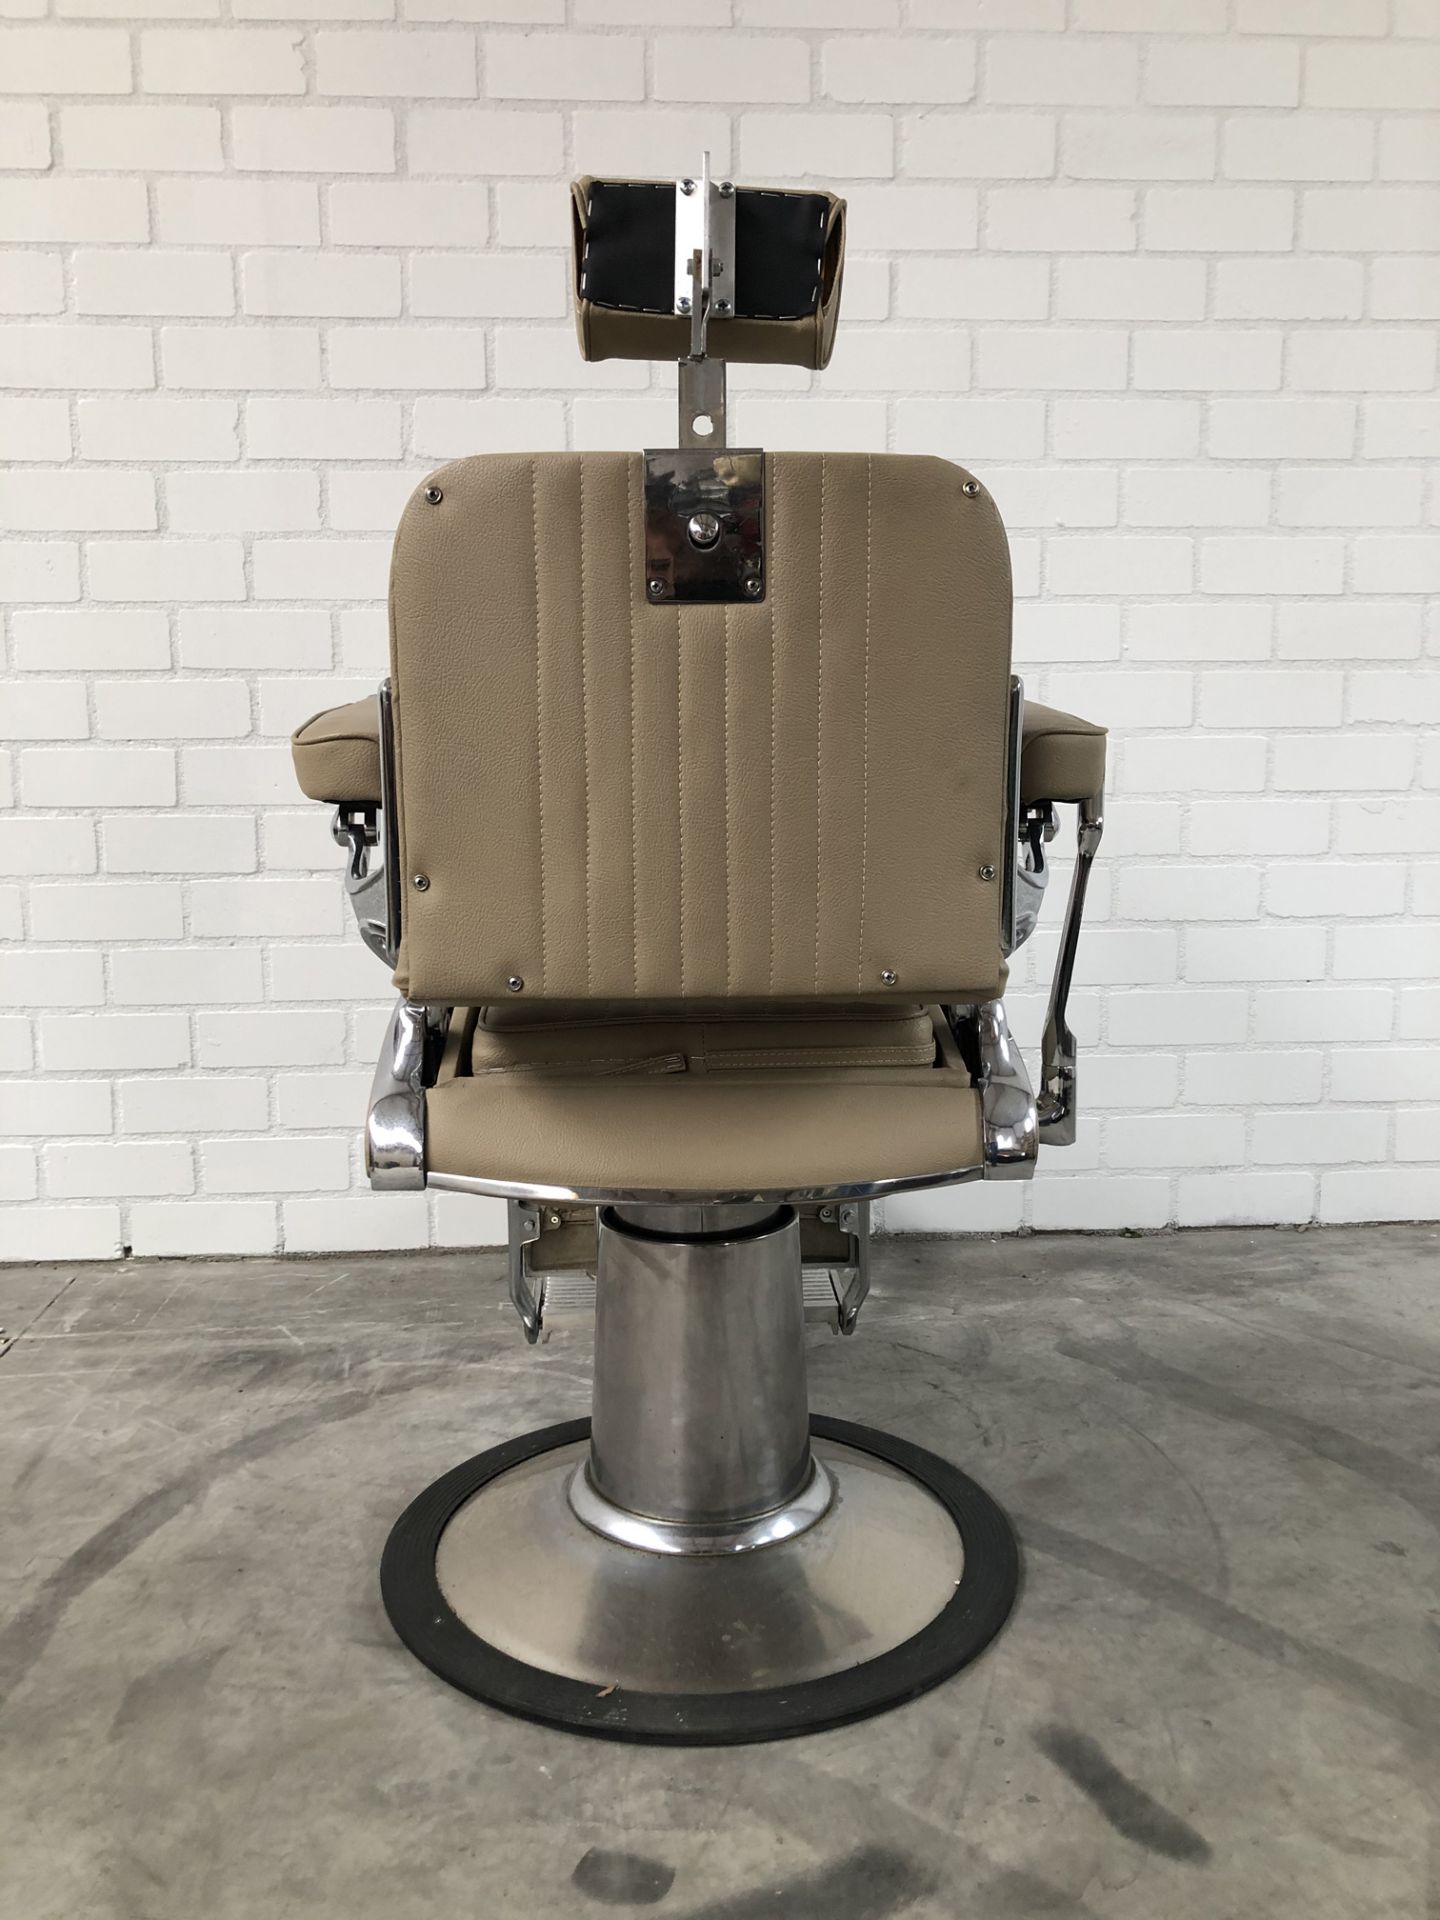 Completely Restored Original Barber Chair - Image 7 of 13